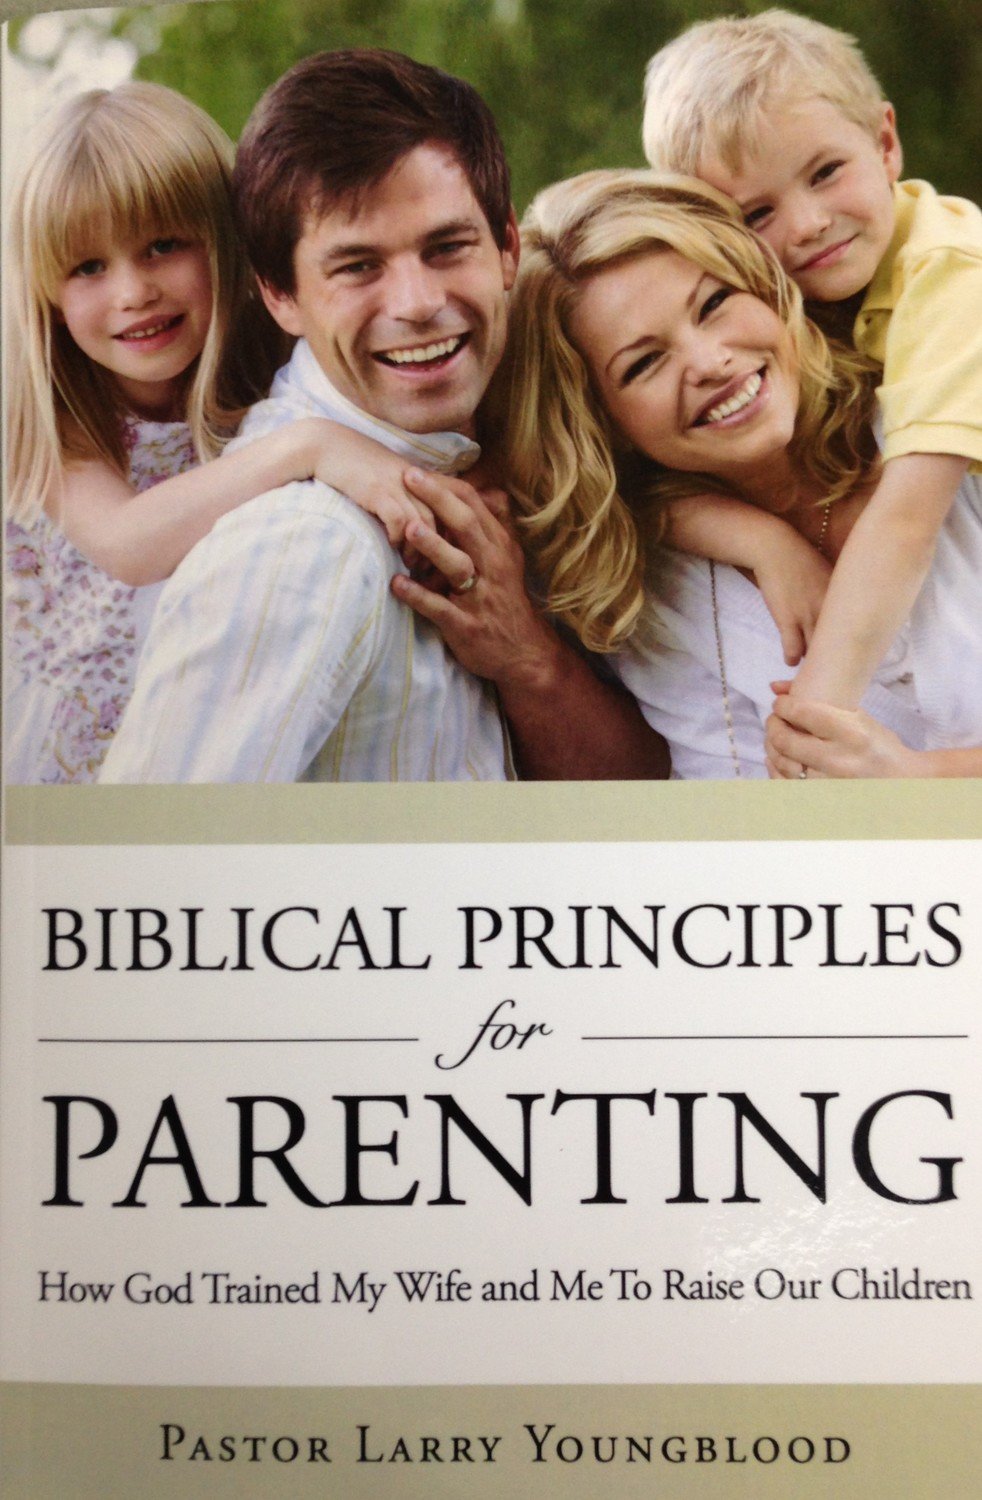 Biblical Principles for Parenting:  How God Trained My Wife and Me to Raise Our Children  by Pastor Larry Youngblood